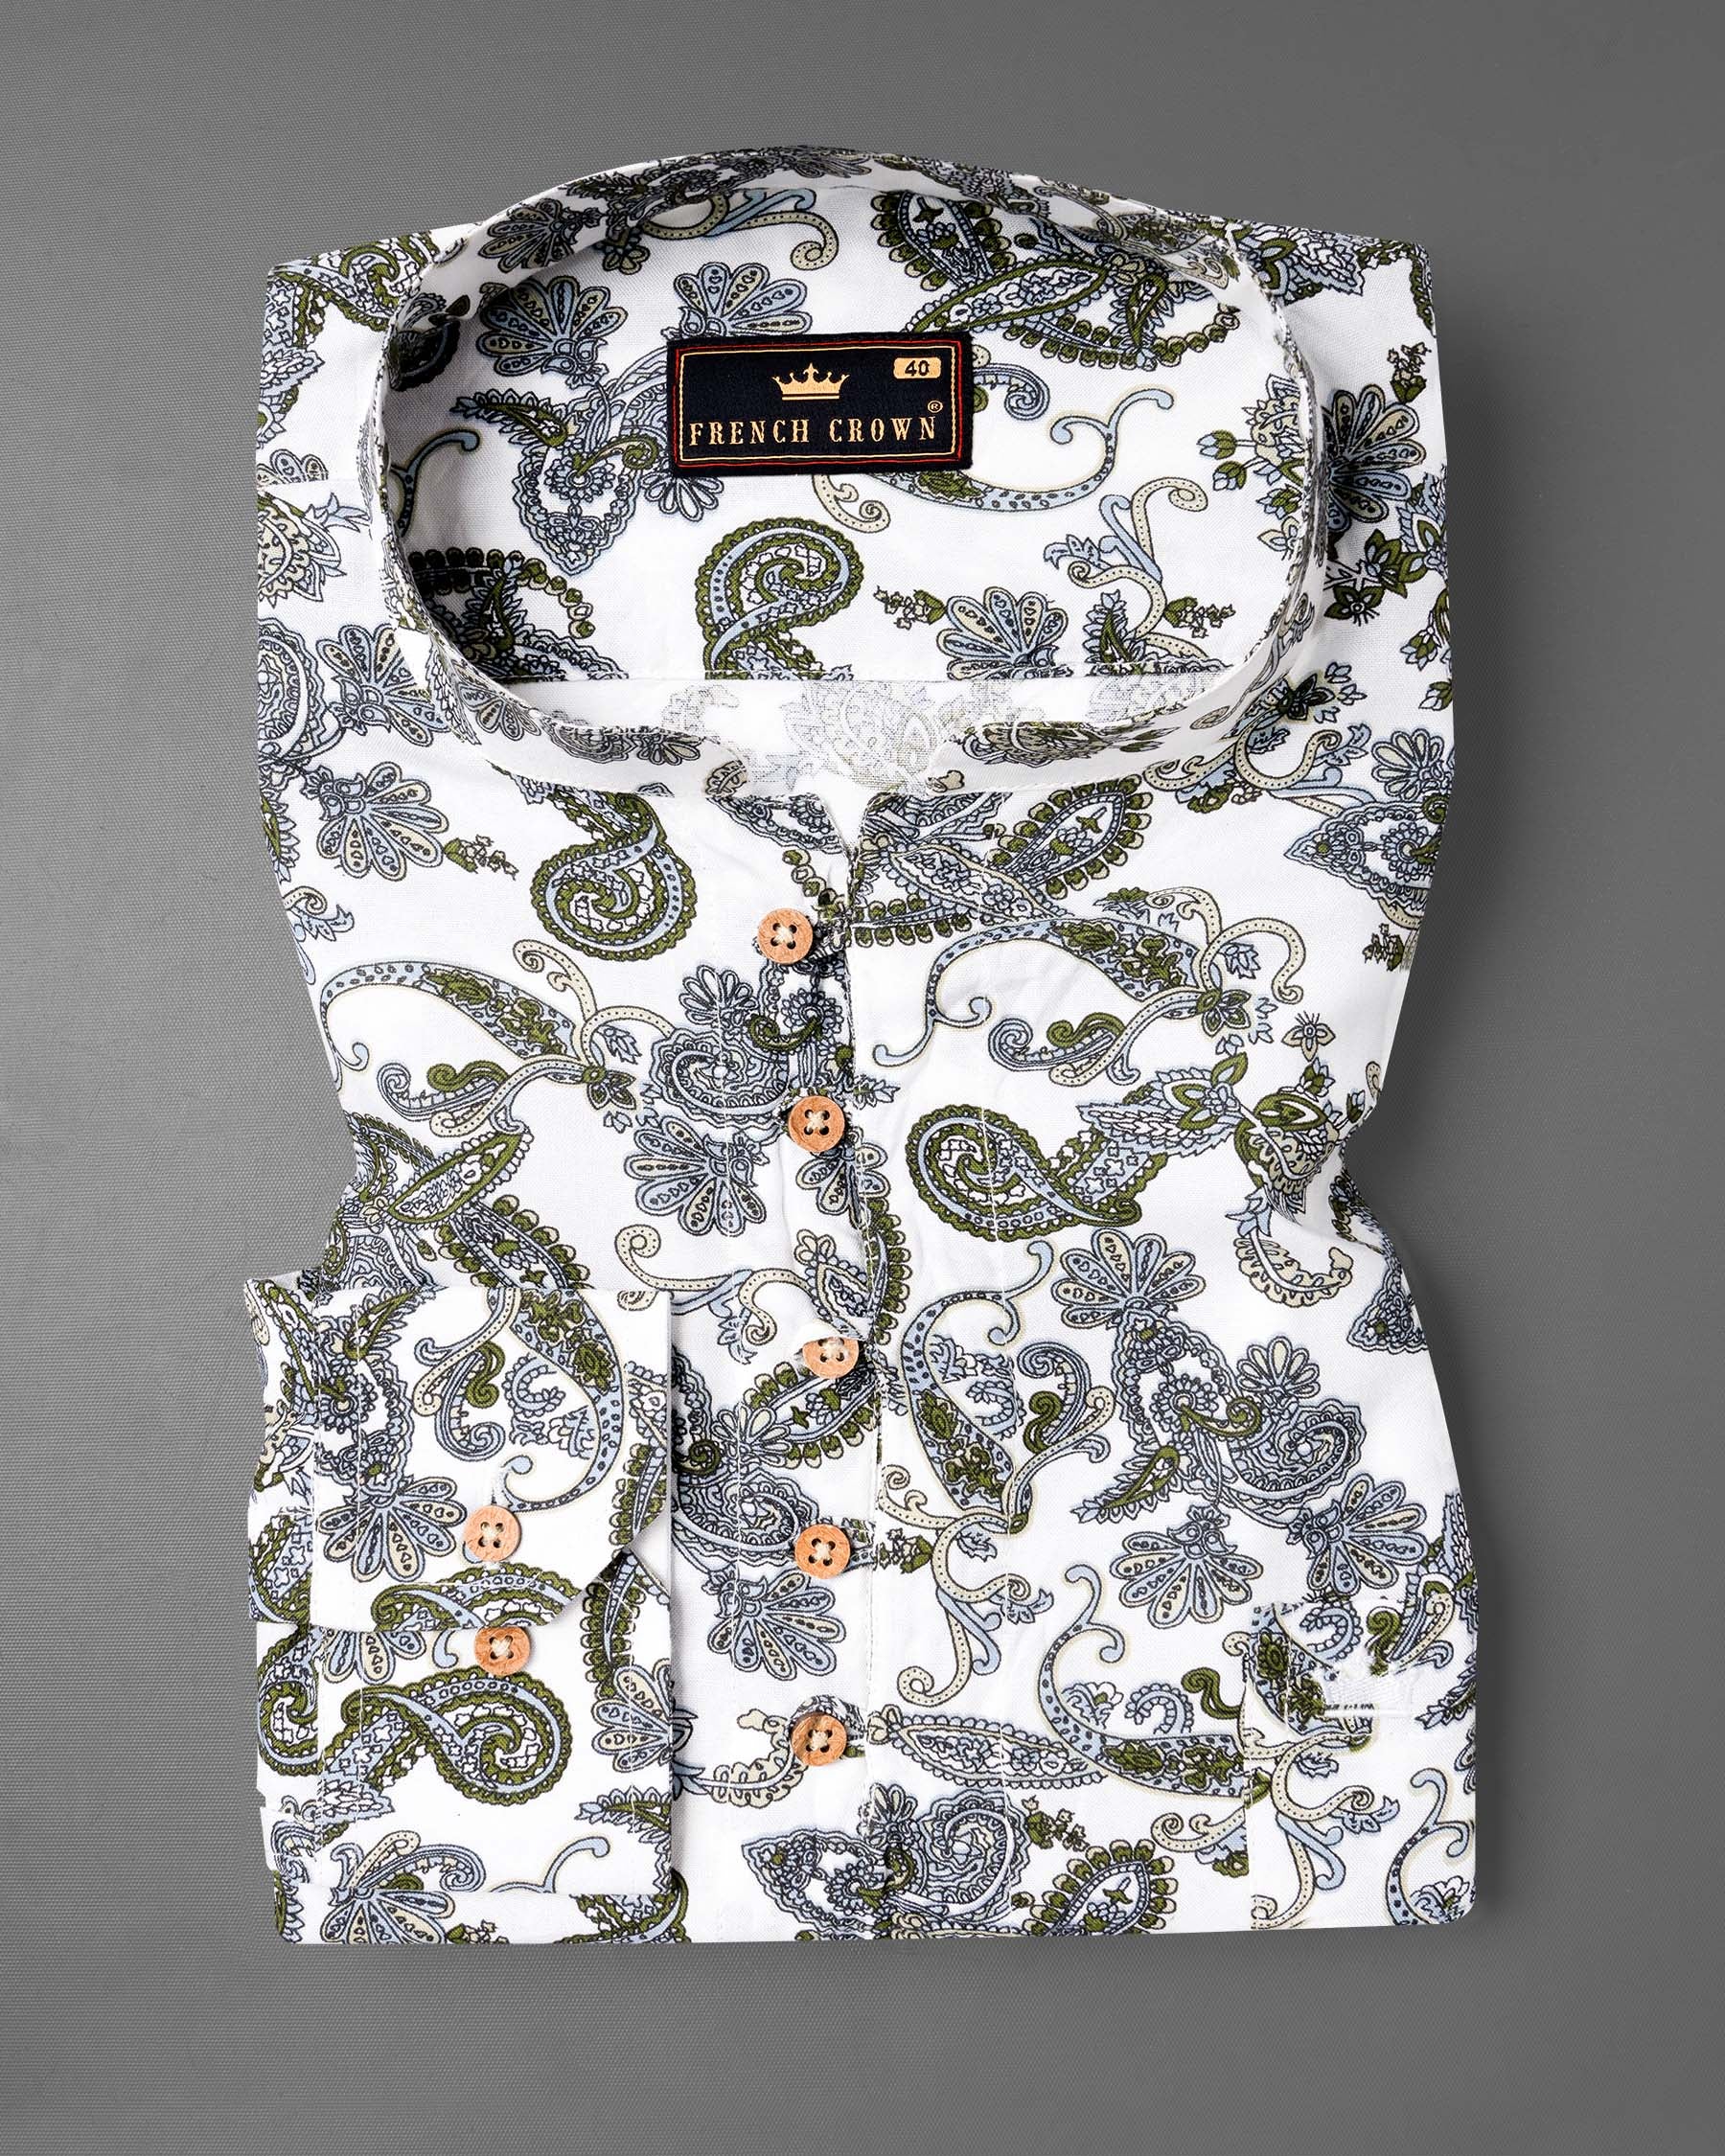 White Lilac and Rifle Green Paisley Printed Tencel Kurta Shirt 6847-KS-38,6847-KS-38,6847-KS-39,6847-KS-39,6847-KS-40,6847-KS-40,6847-KS-42,6847-KS-42,6847-KS-44,6847-KS-44,6847-KS-46,6847-KS-46,6847-KS-48,6847-KS-48,6847-KS-50,6847-KS-50,6847-KS-52,6847-KS-52